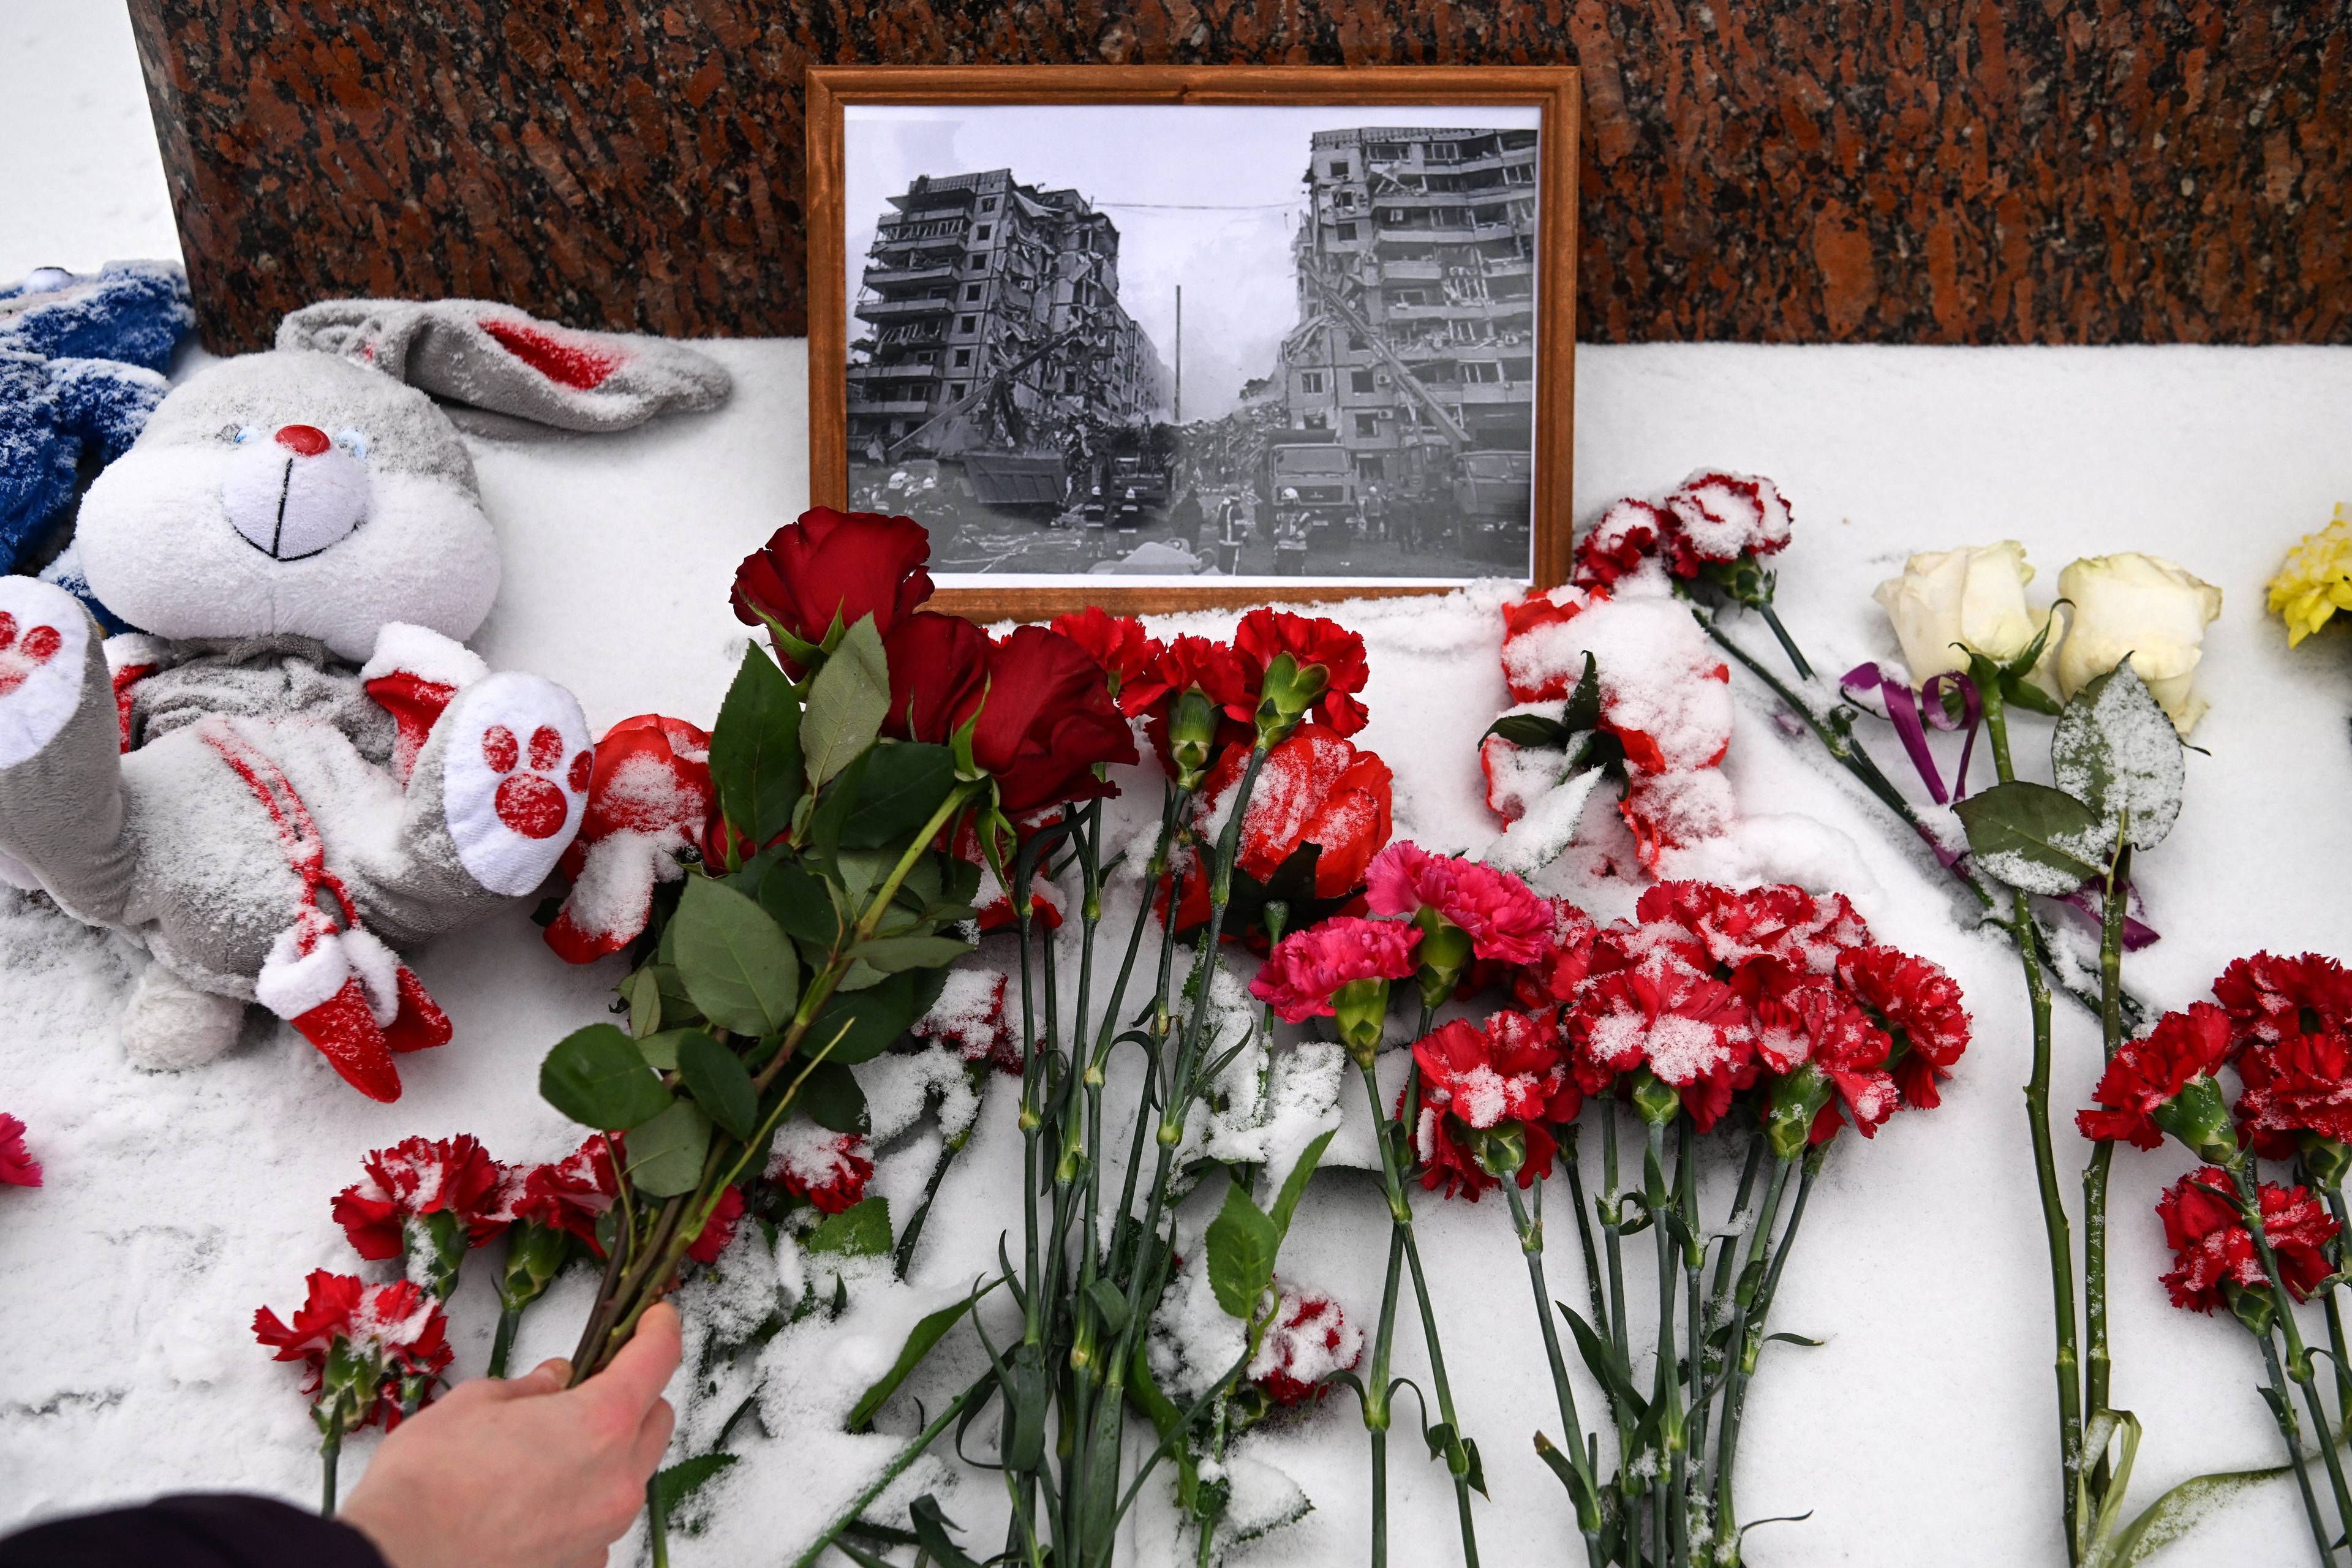 A person lays flowers in memory of those killed in the weekend strike on a residential block in the Ukrainian city of Dnipro, at the monument to famous Ukrainian poetess Lesya Ukrainka in Moscow on January 17, 2023. (Photo by - / AFP)